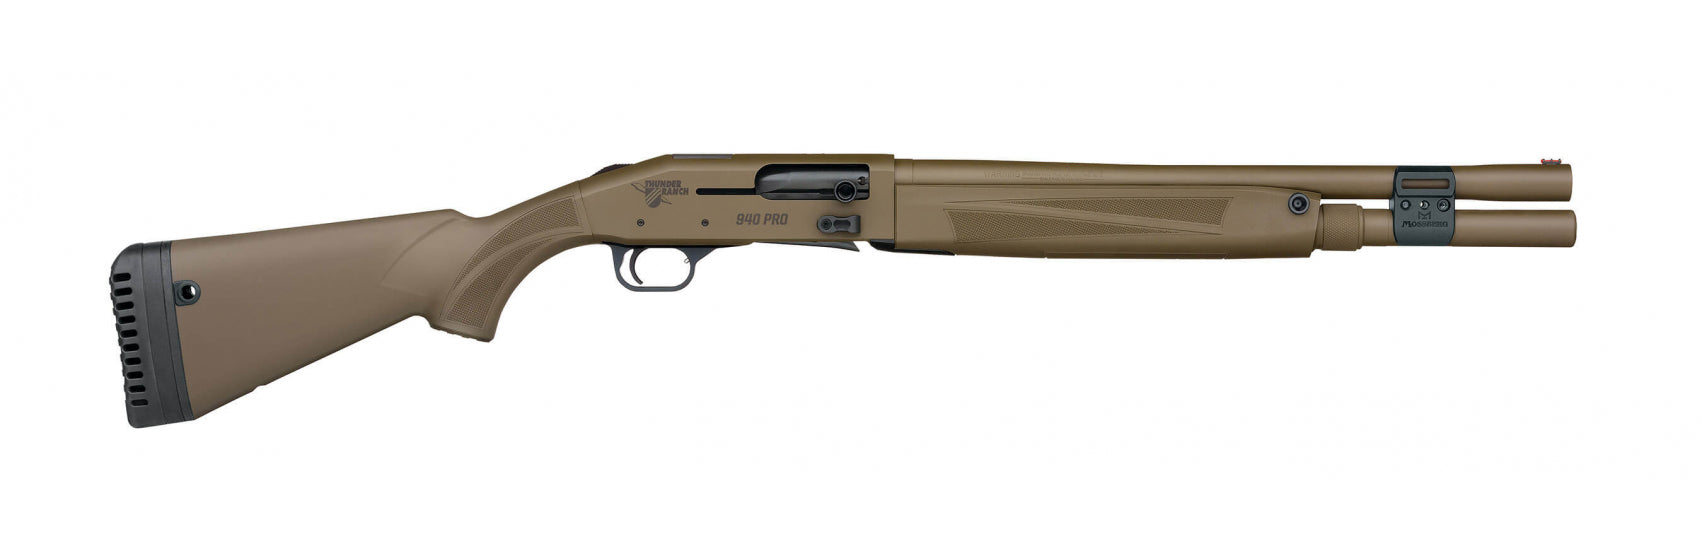 Mossberg 940 Pro Tactical - Thunder Ranch